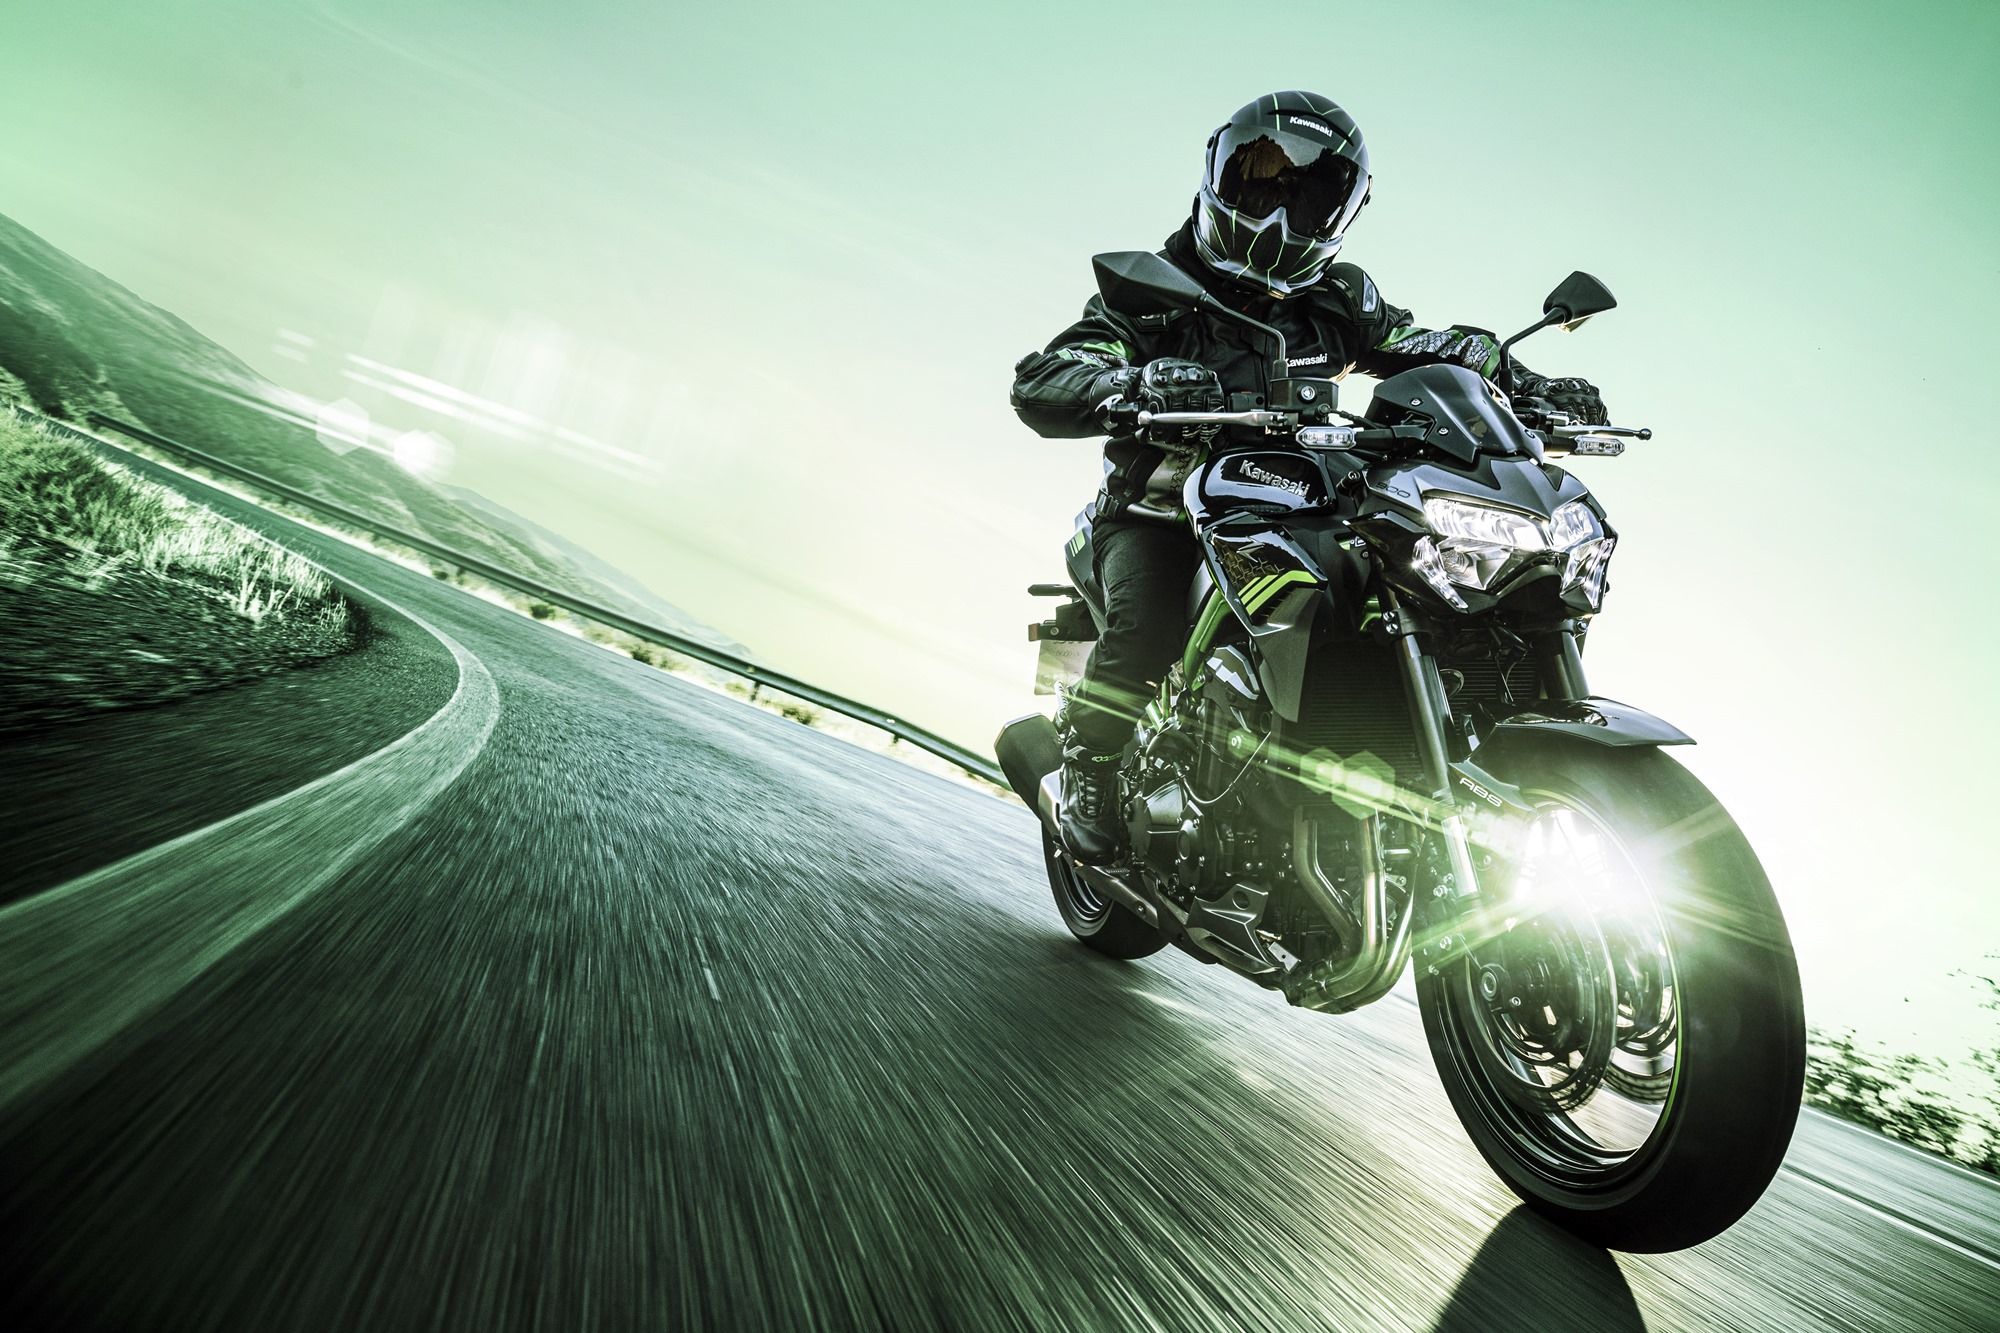 Updated Special Edition Kawasaki Z900 launched at Rs 7.99 lakh